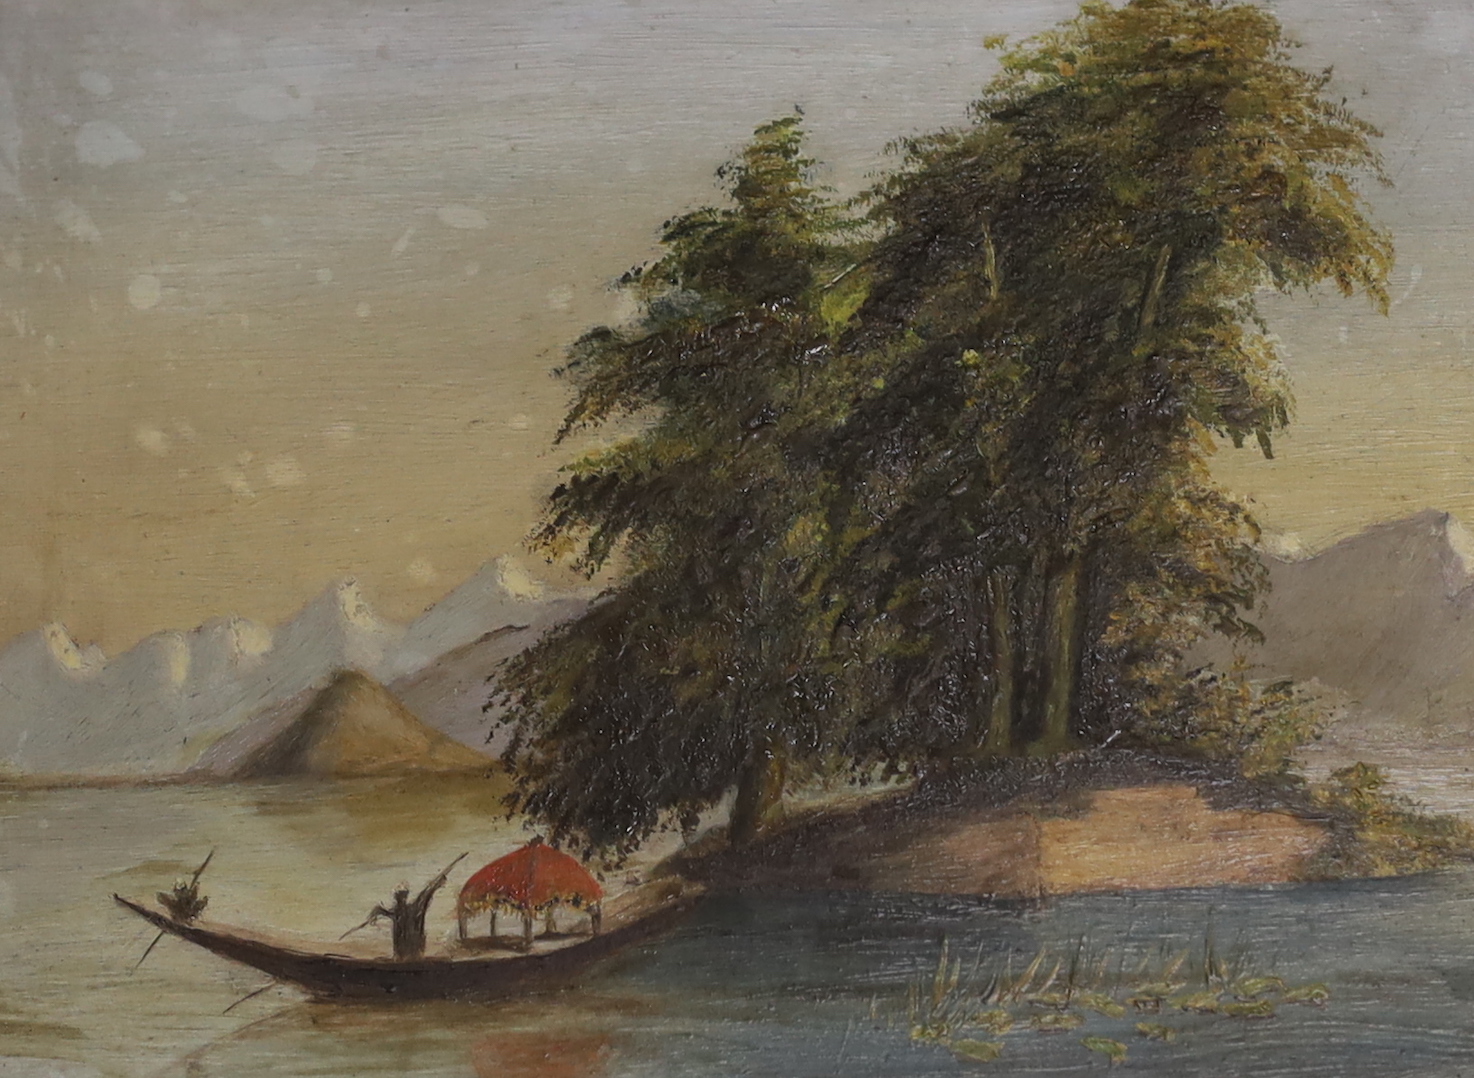 Eastern School, oil on board, Landscape with figure and boat, 12 x 17cm, ornate gilt frame